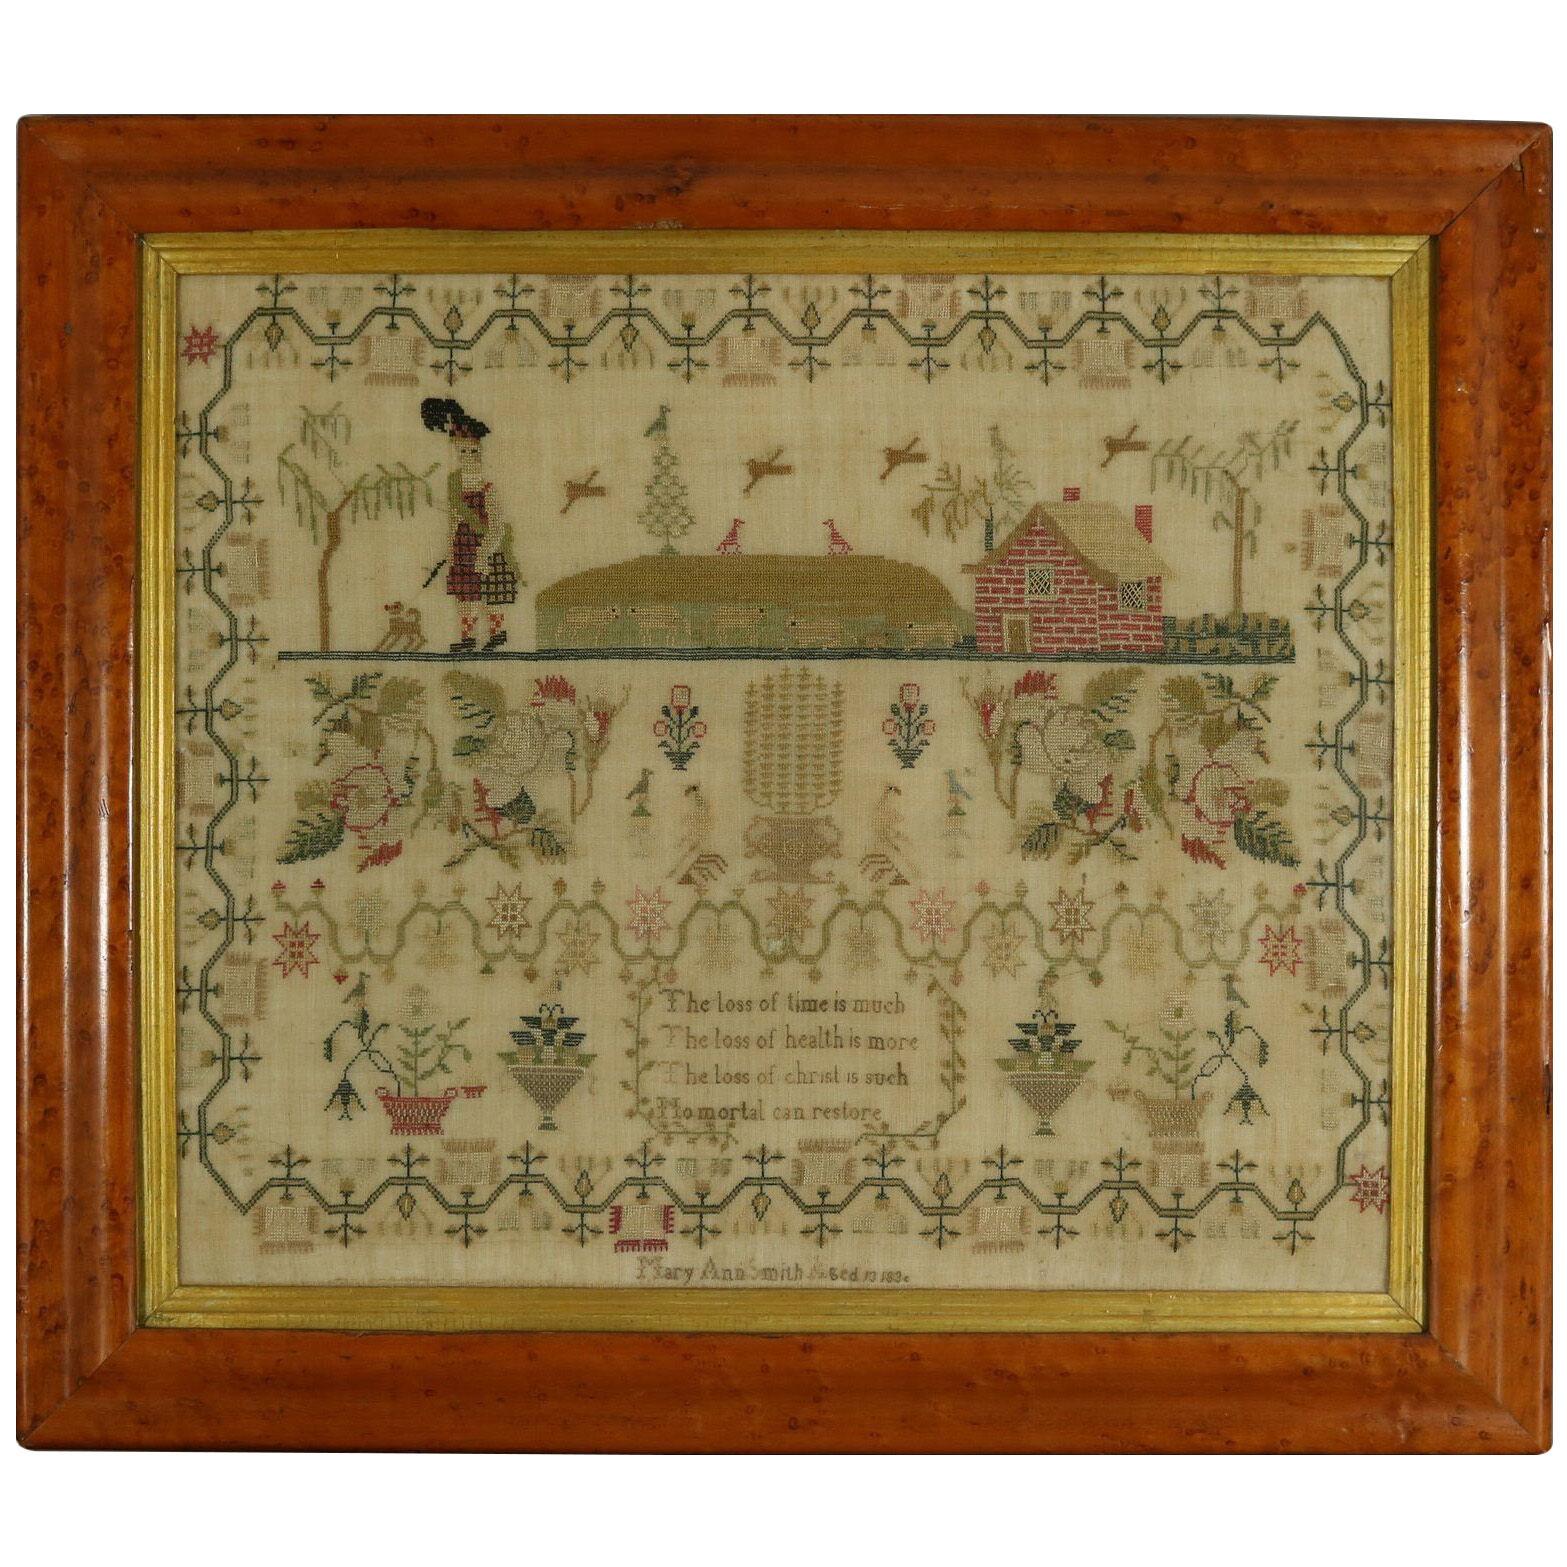 Antique Sampler, 1830, by Mary Ann Smith